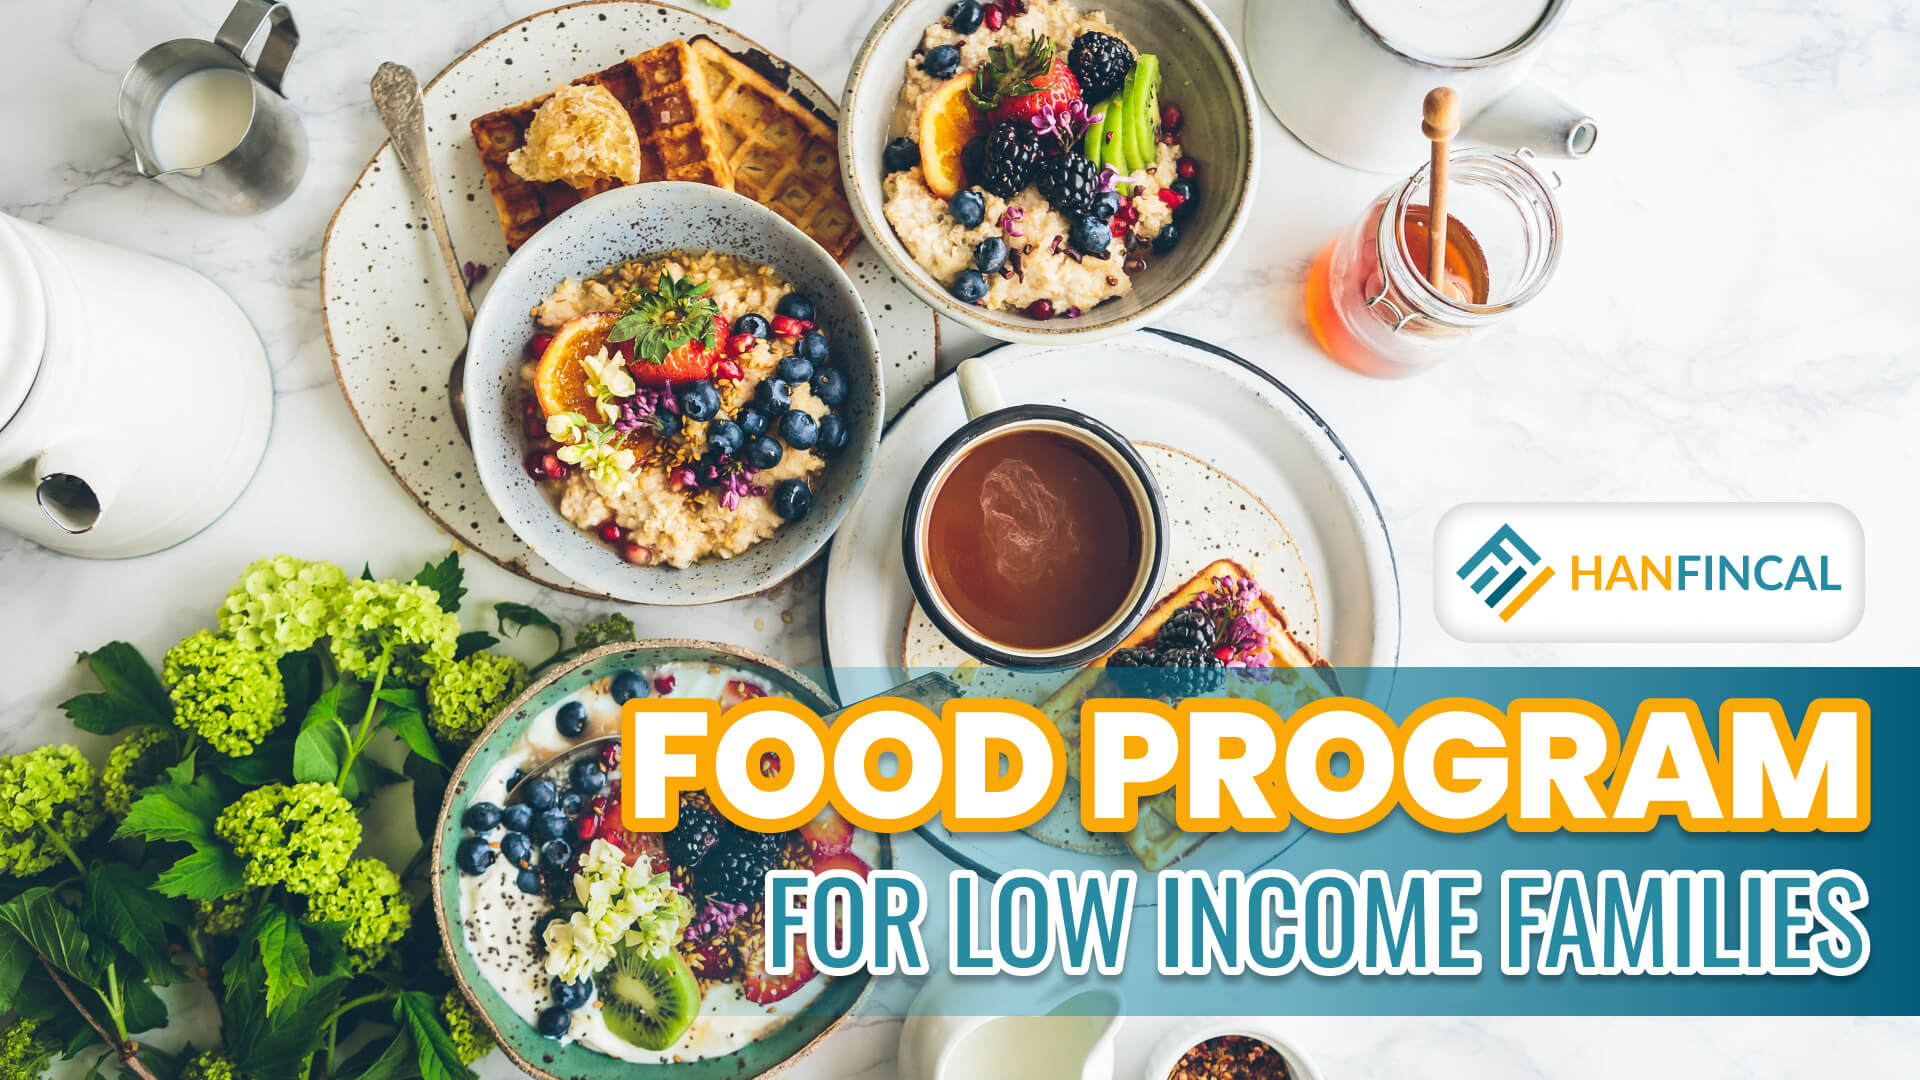 Food Program For Low Income Families